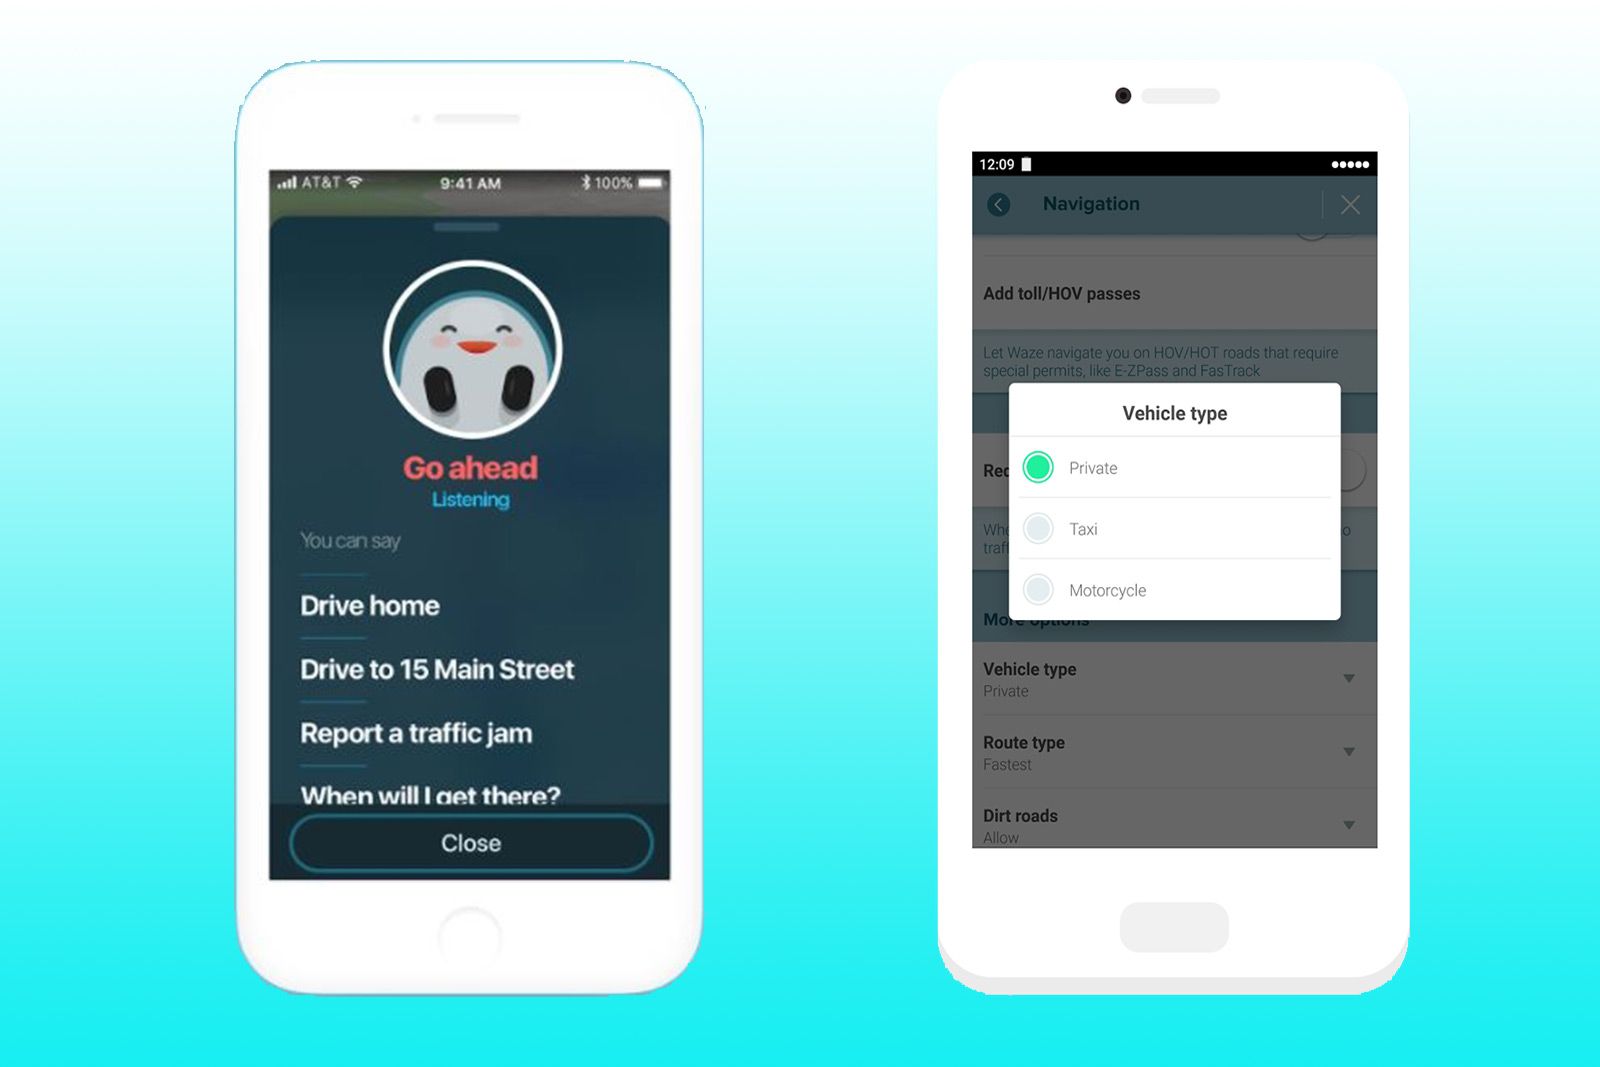 Waze satellite-navigation app now caters for motorcyclists with dedicated hands-free mode image 1